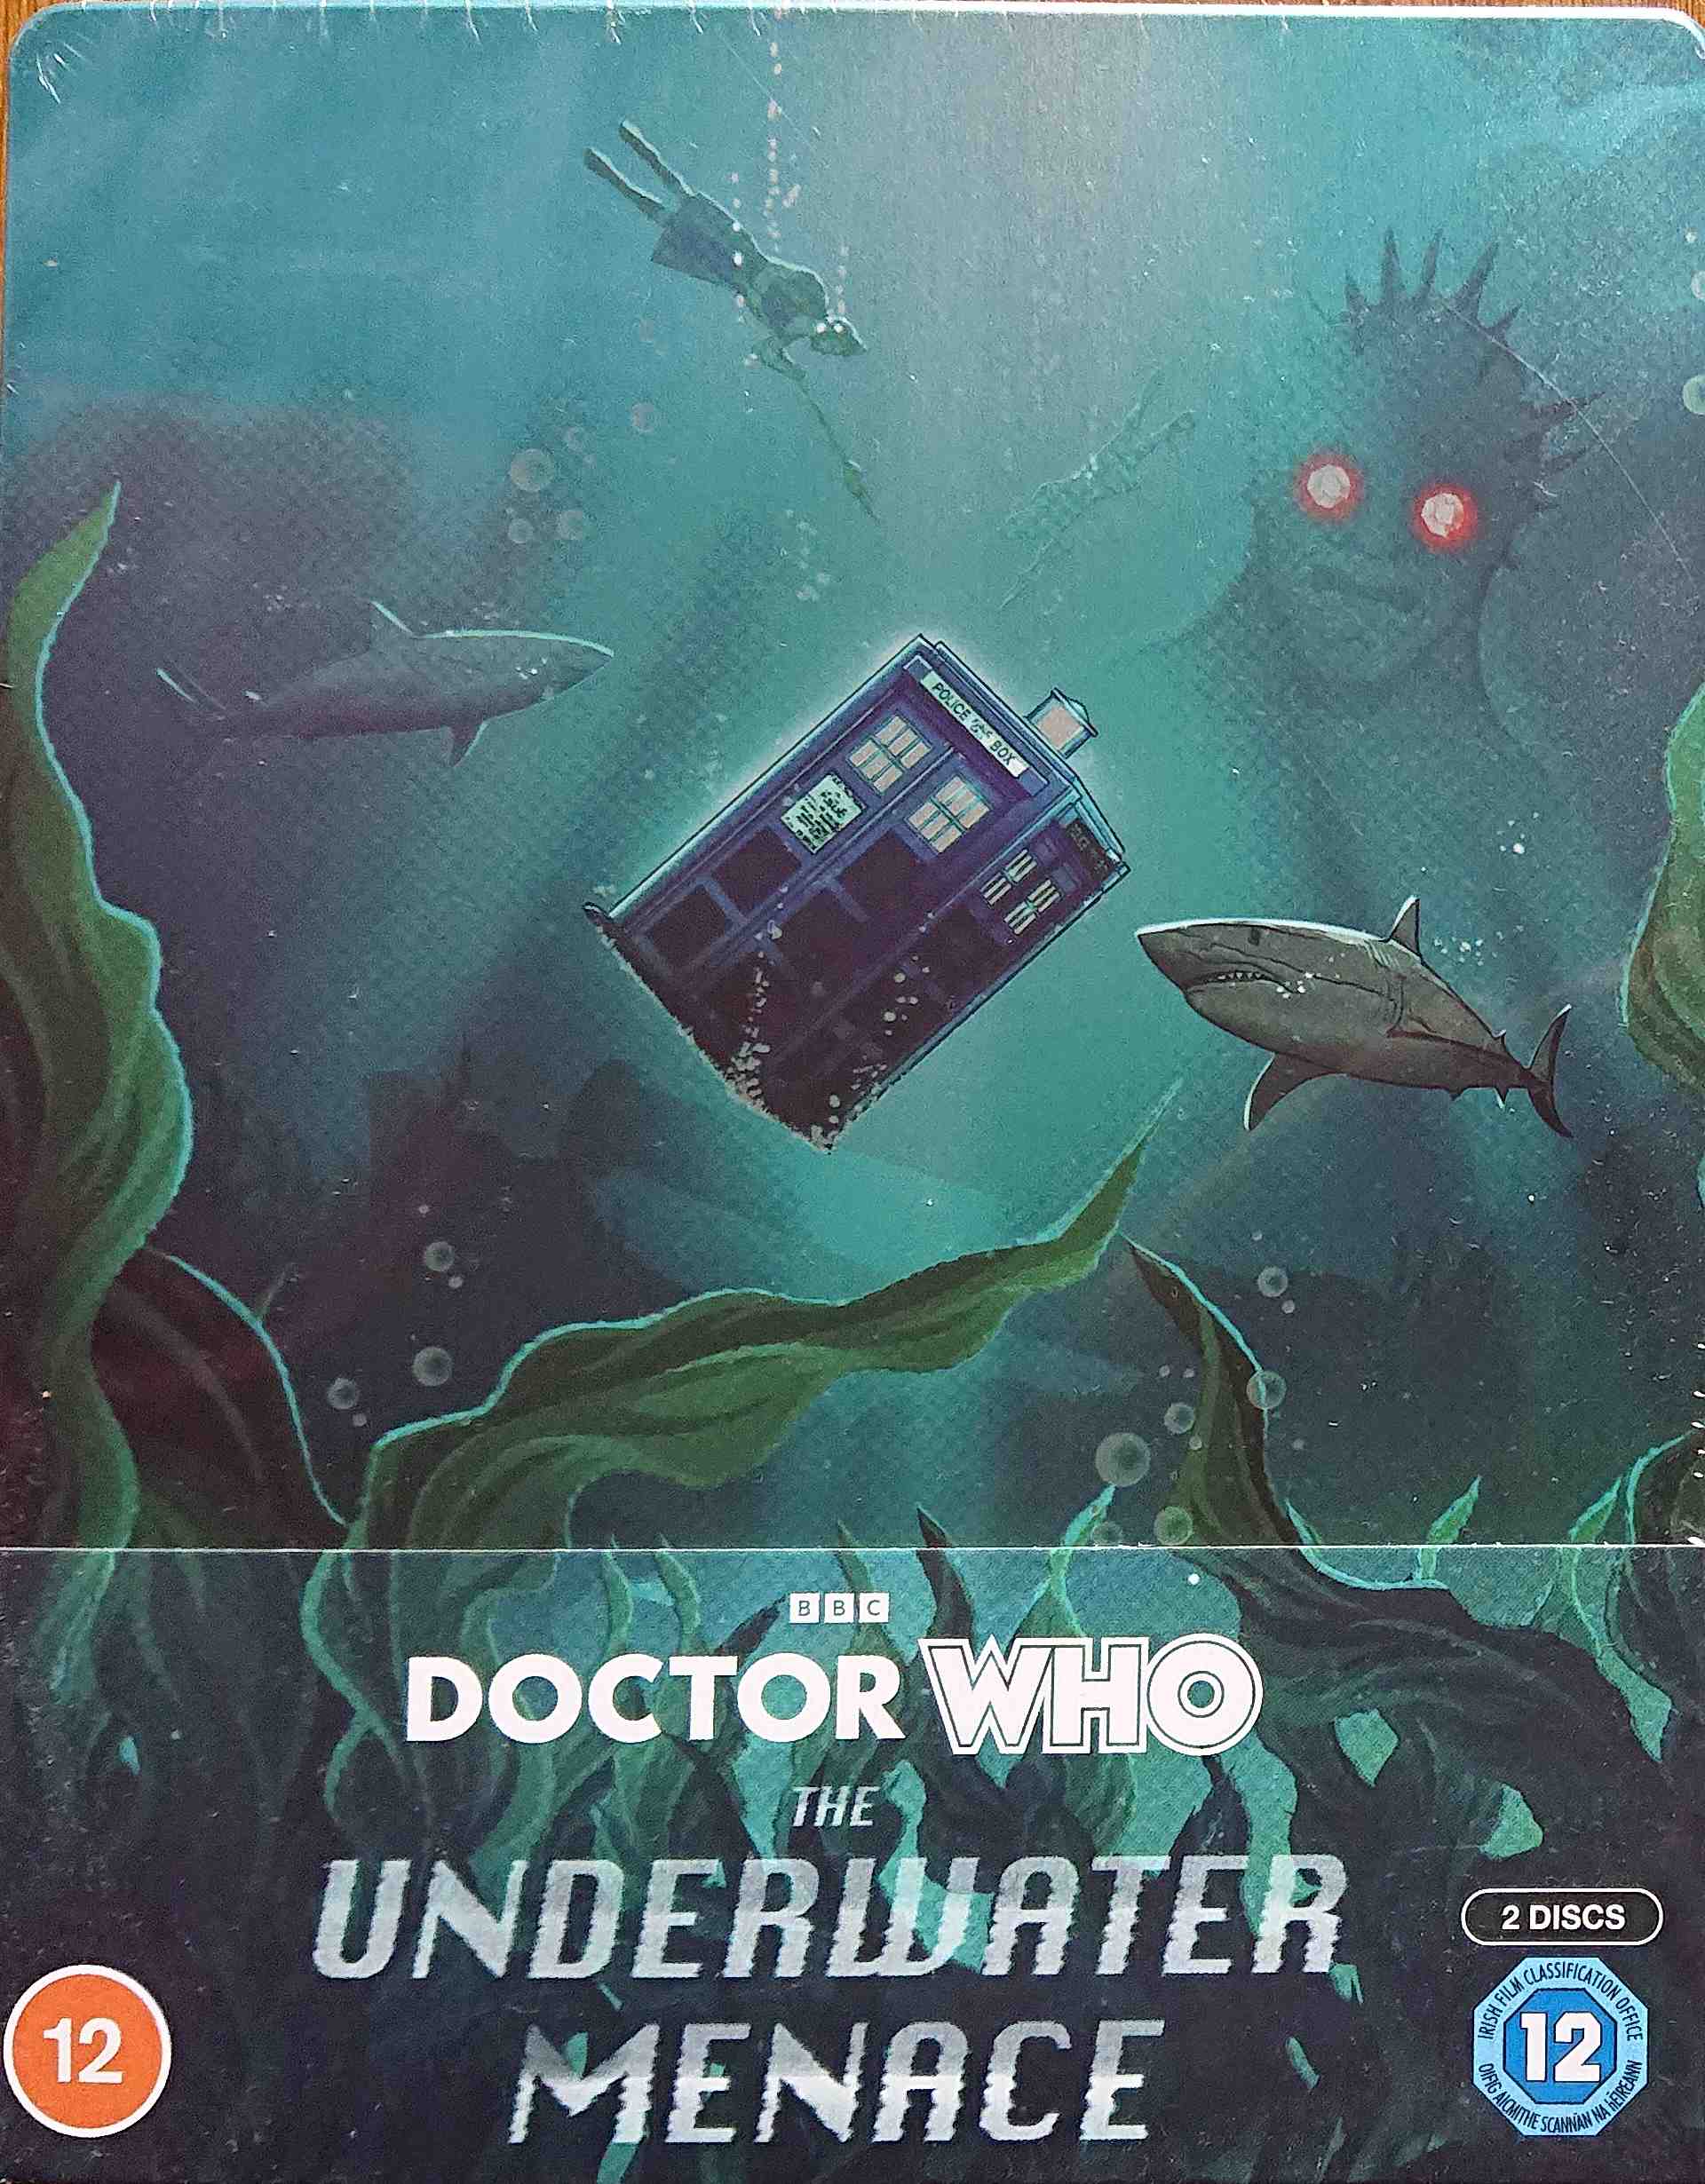 Picture of BBCBD 0578 Doctor Who - The underwater menace by artist Geoffrey Orme from the BBC blu-rays - Records and Tapes library